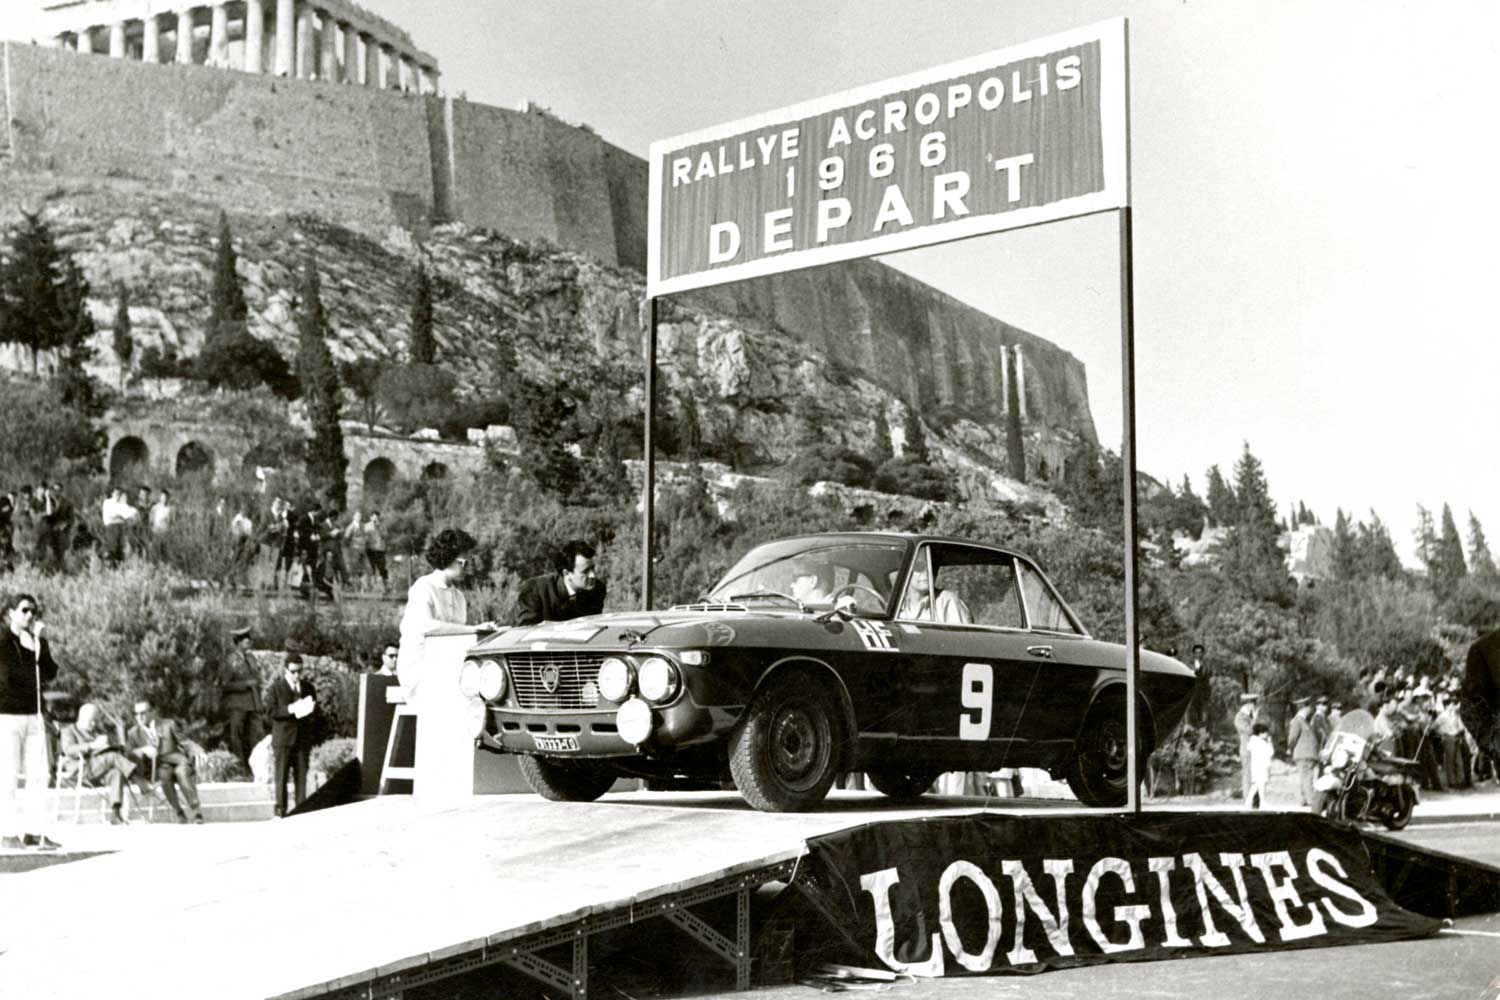 In 1955, Longines launched a special punch printing device called Printogines, that when used with a clock, allowed the rally car racers to punch their own control card at each checkpoint, like at the Rallye Acropolis in Greece